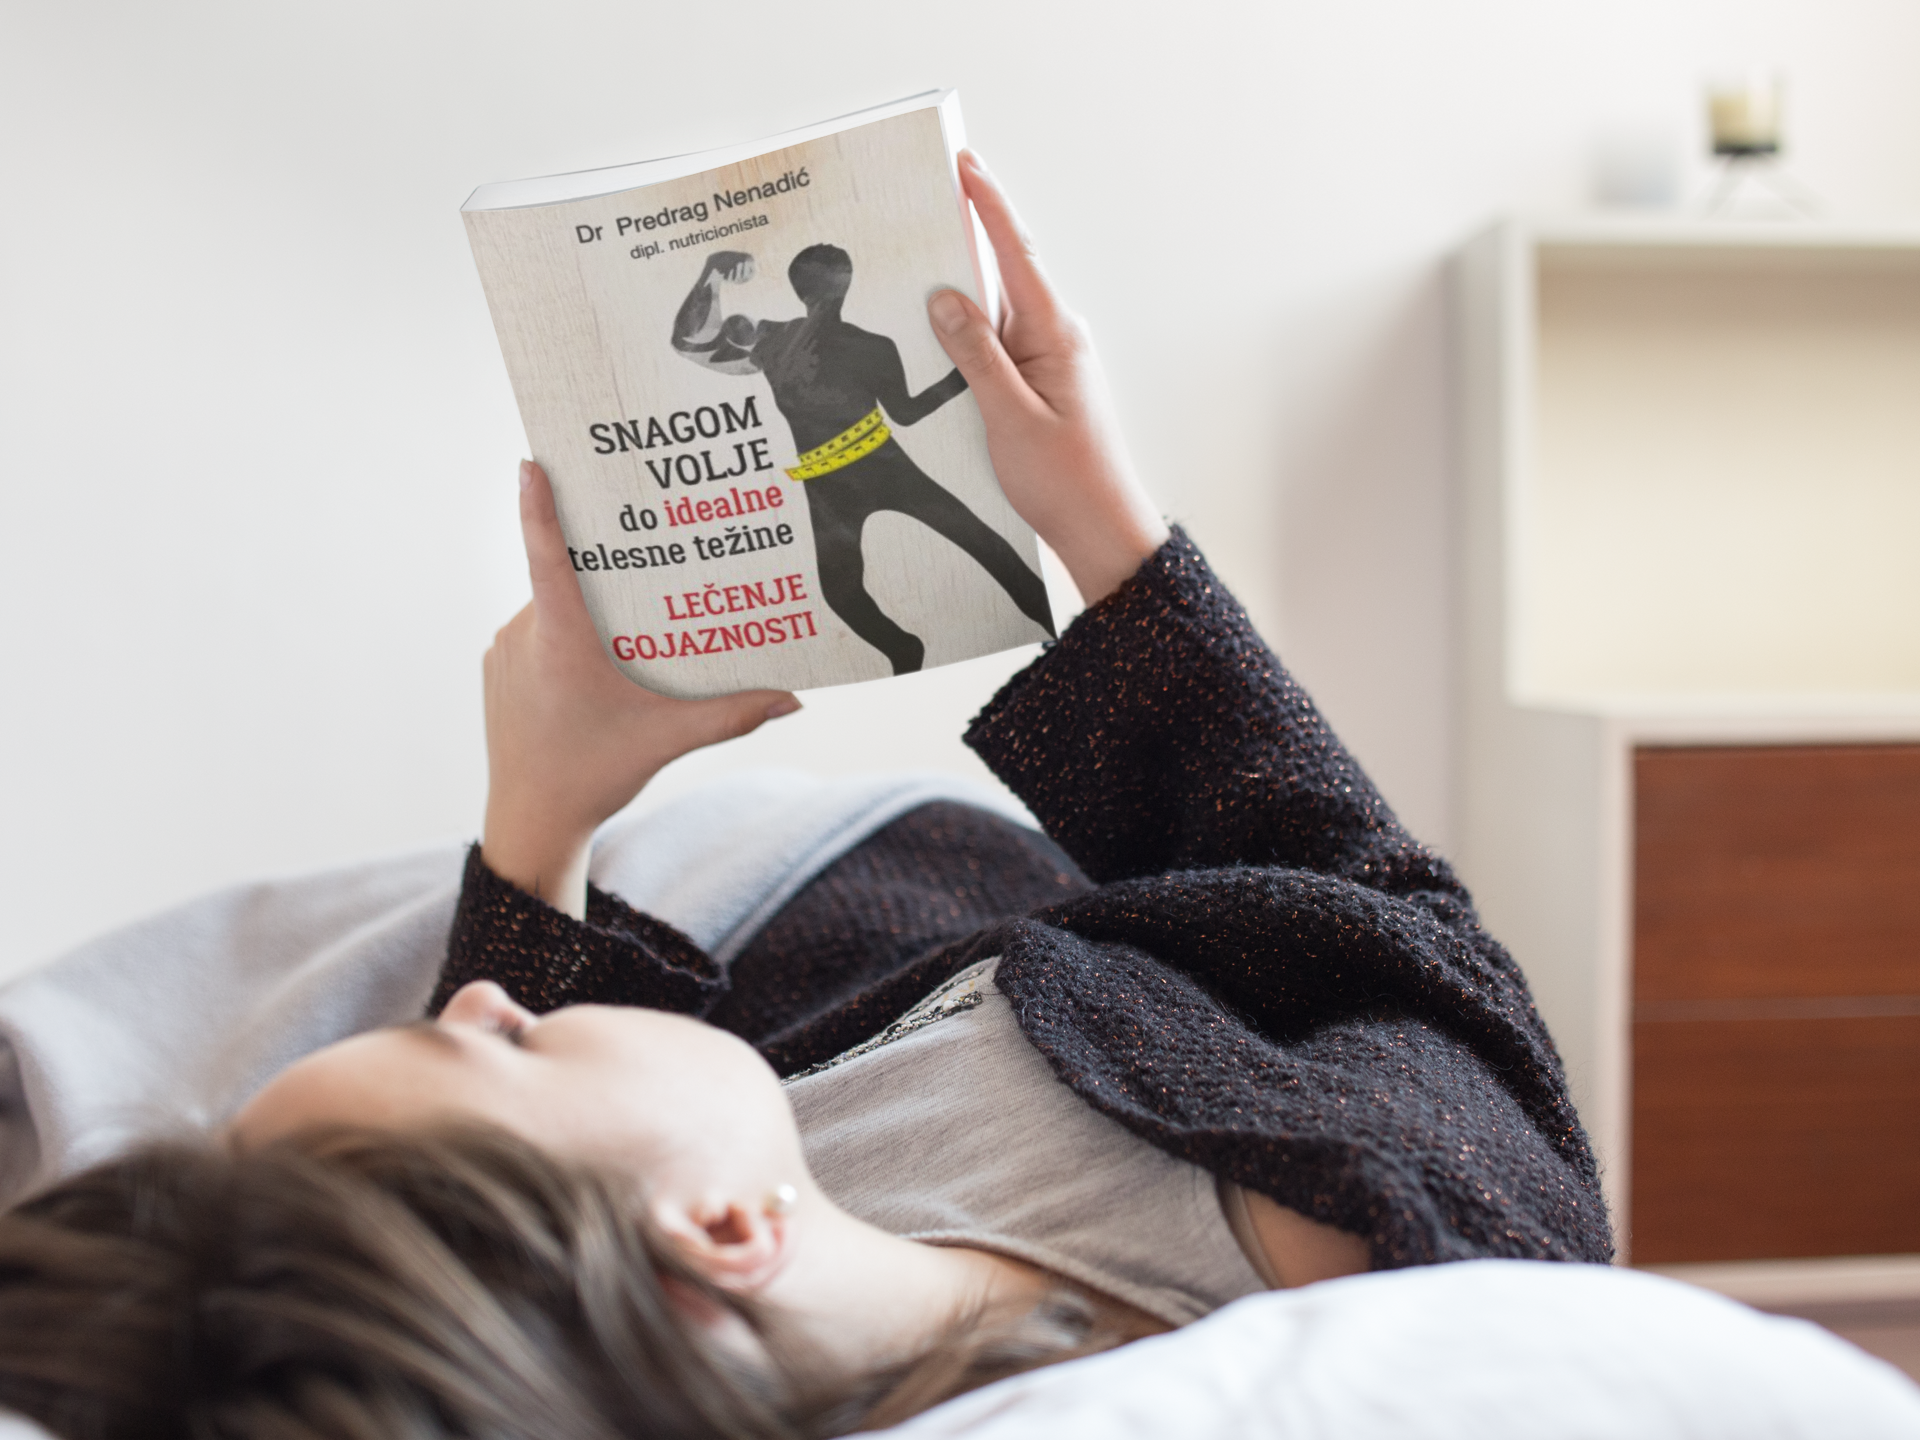 young-girl-looking-at-a-book-cover-while-lying-down-in-her-bed-mockup-a14302